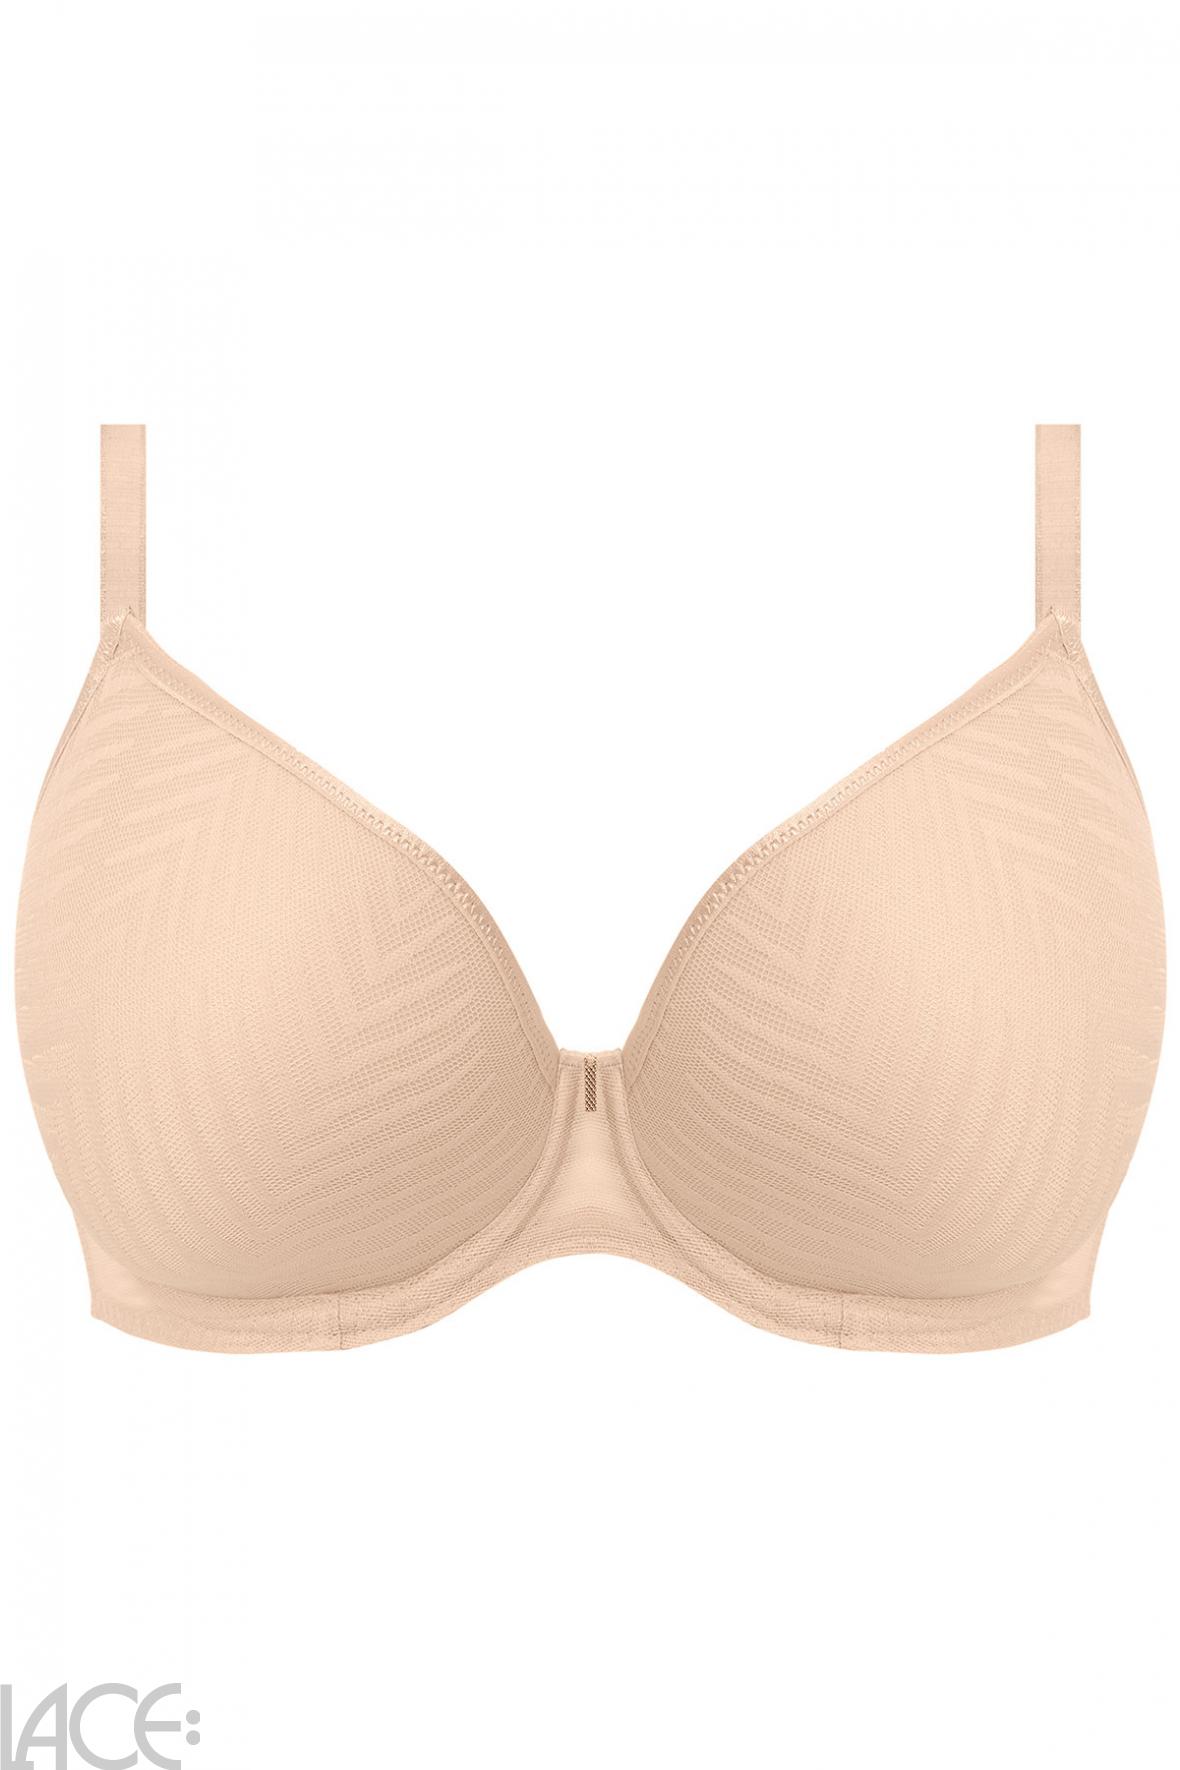 Freya Lingerie Tailored Padded bra F-J cup NATURAL BEIGE – Lace